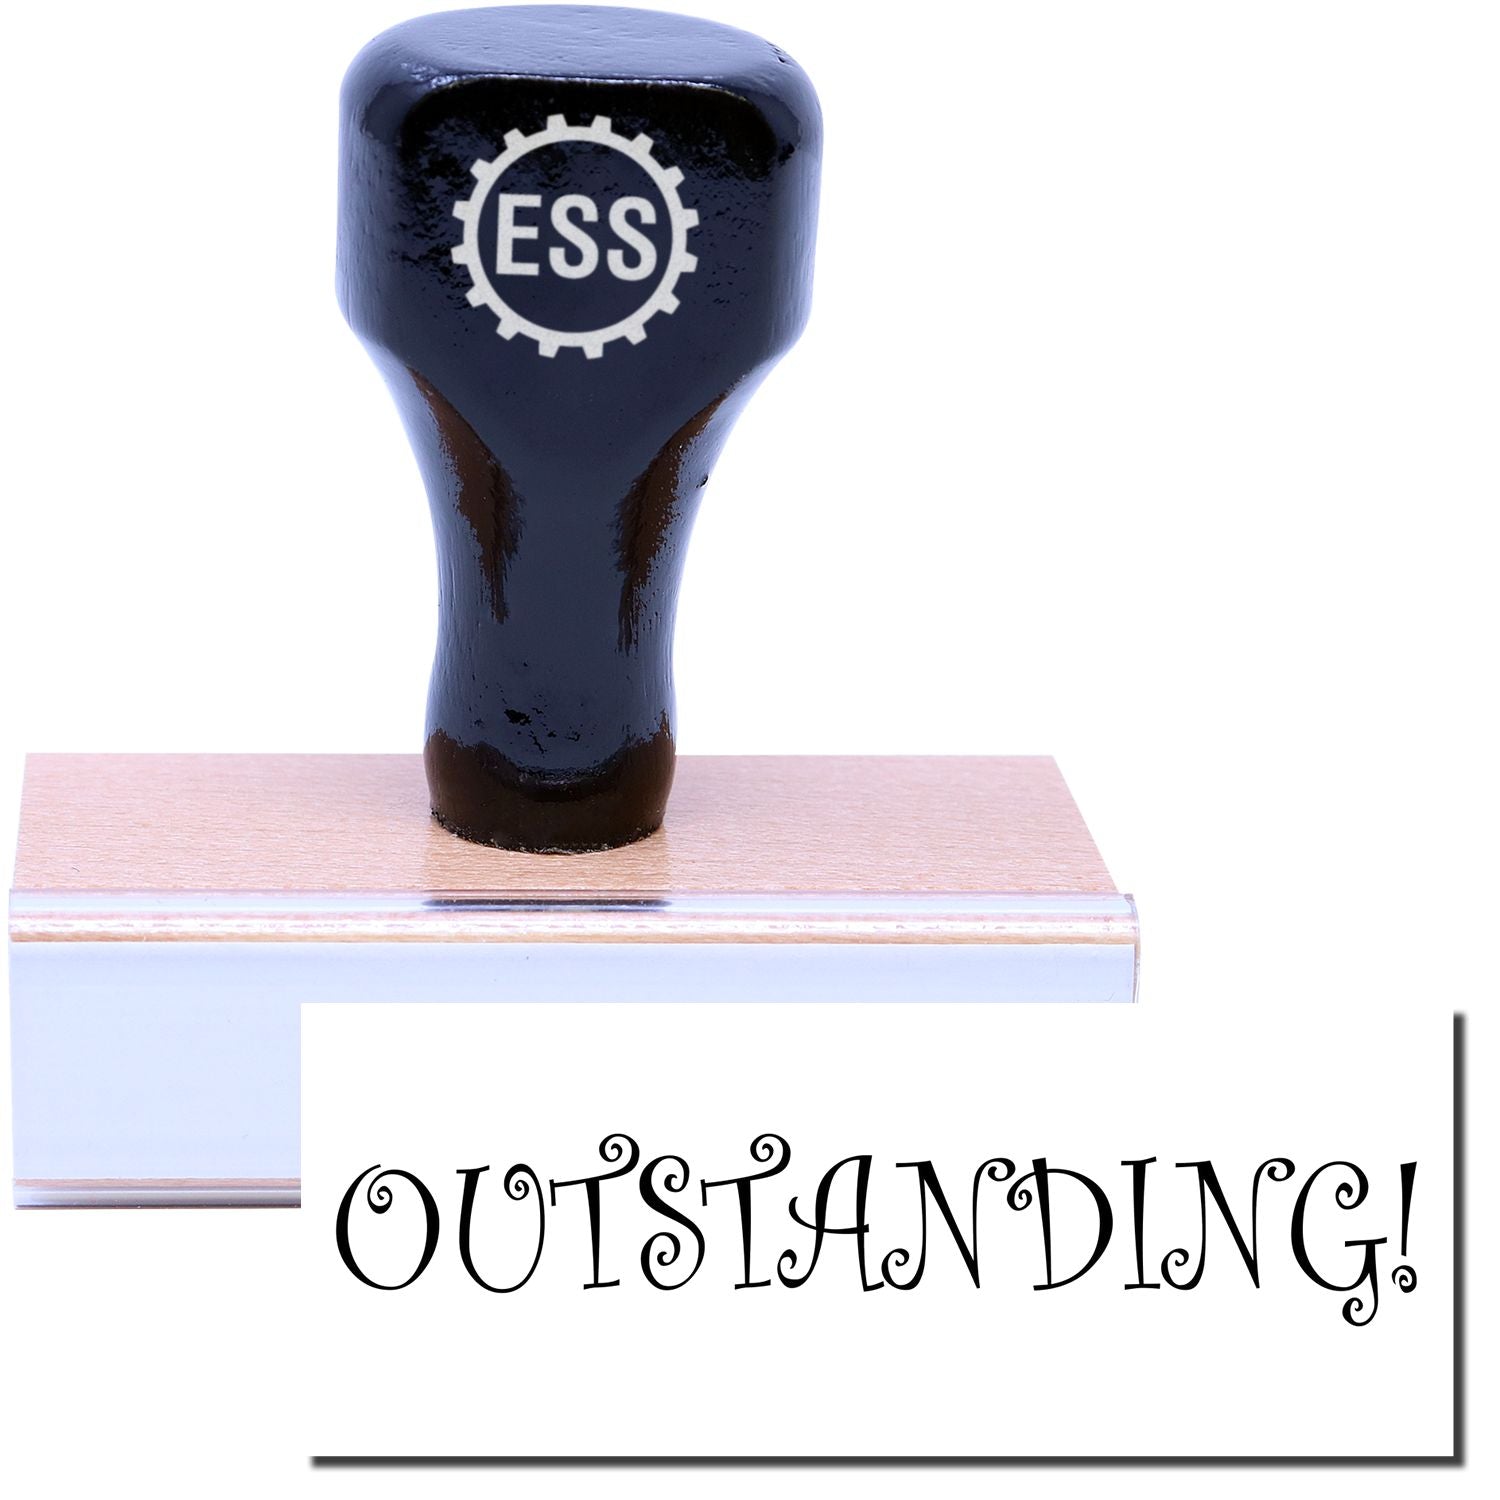 A stock office rubber stamp with a stamped image showing how the text "OUTSTANDING!" is displayed after stamping.